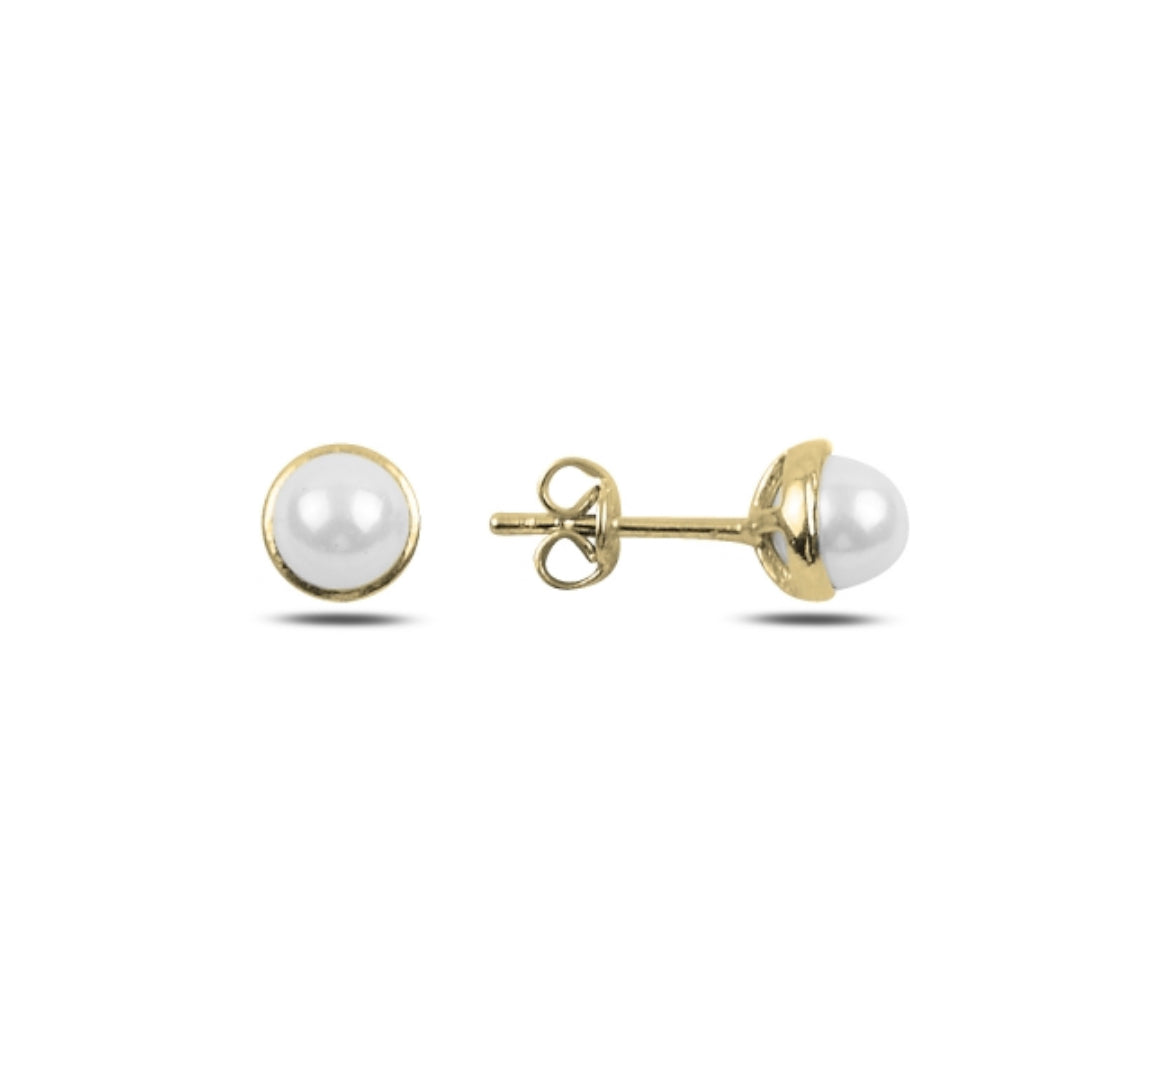 Gold Plated Freshwater Pearls Earrings Studs Byou Designs